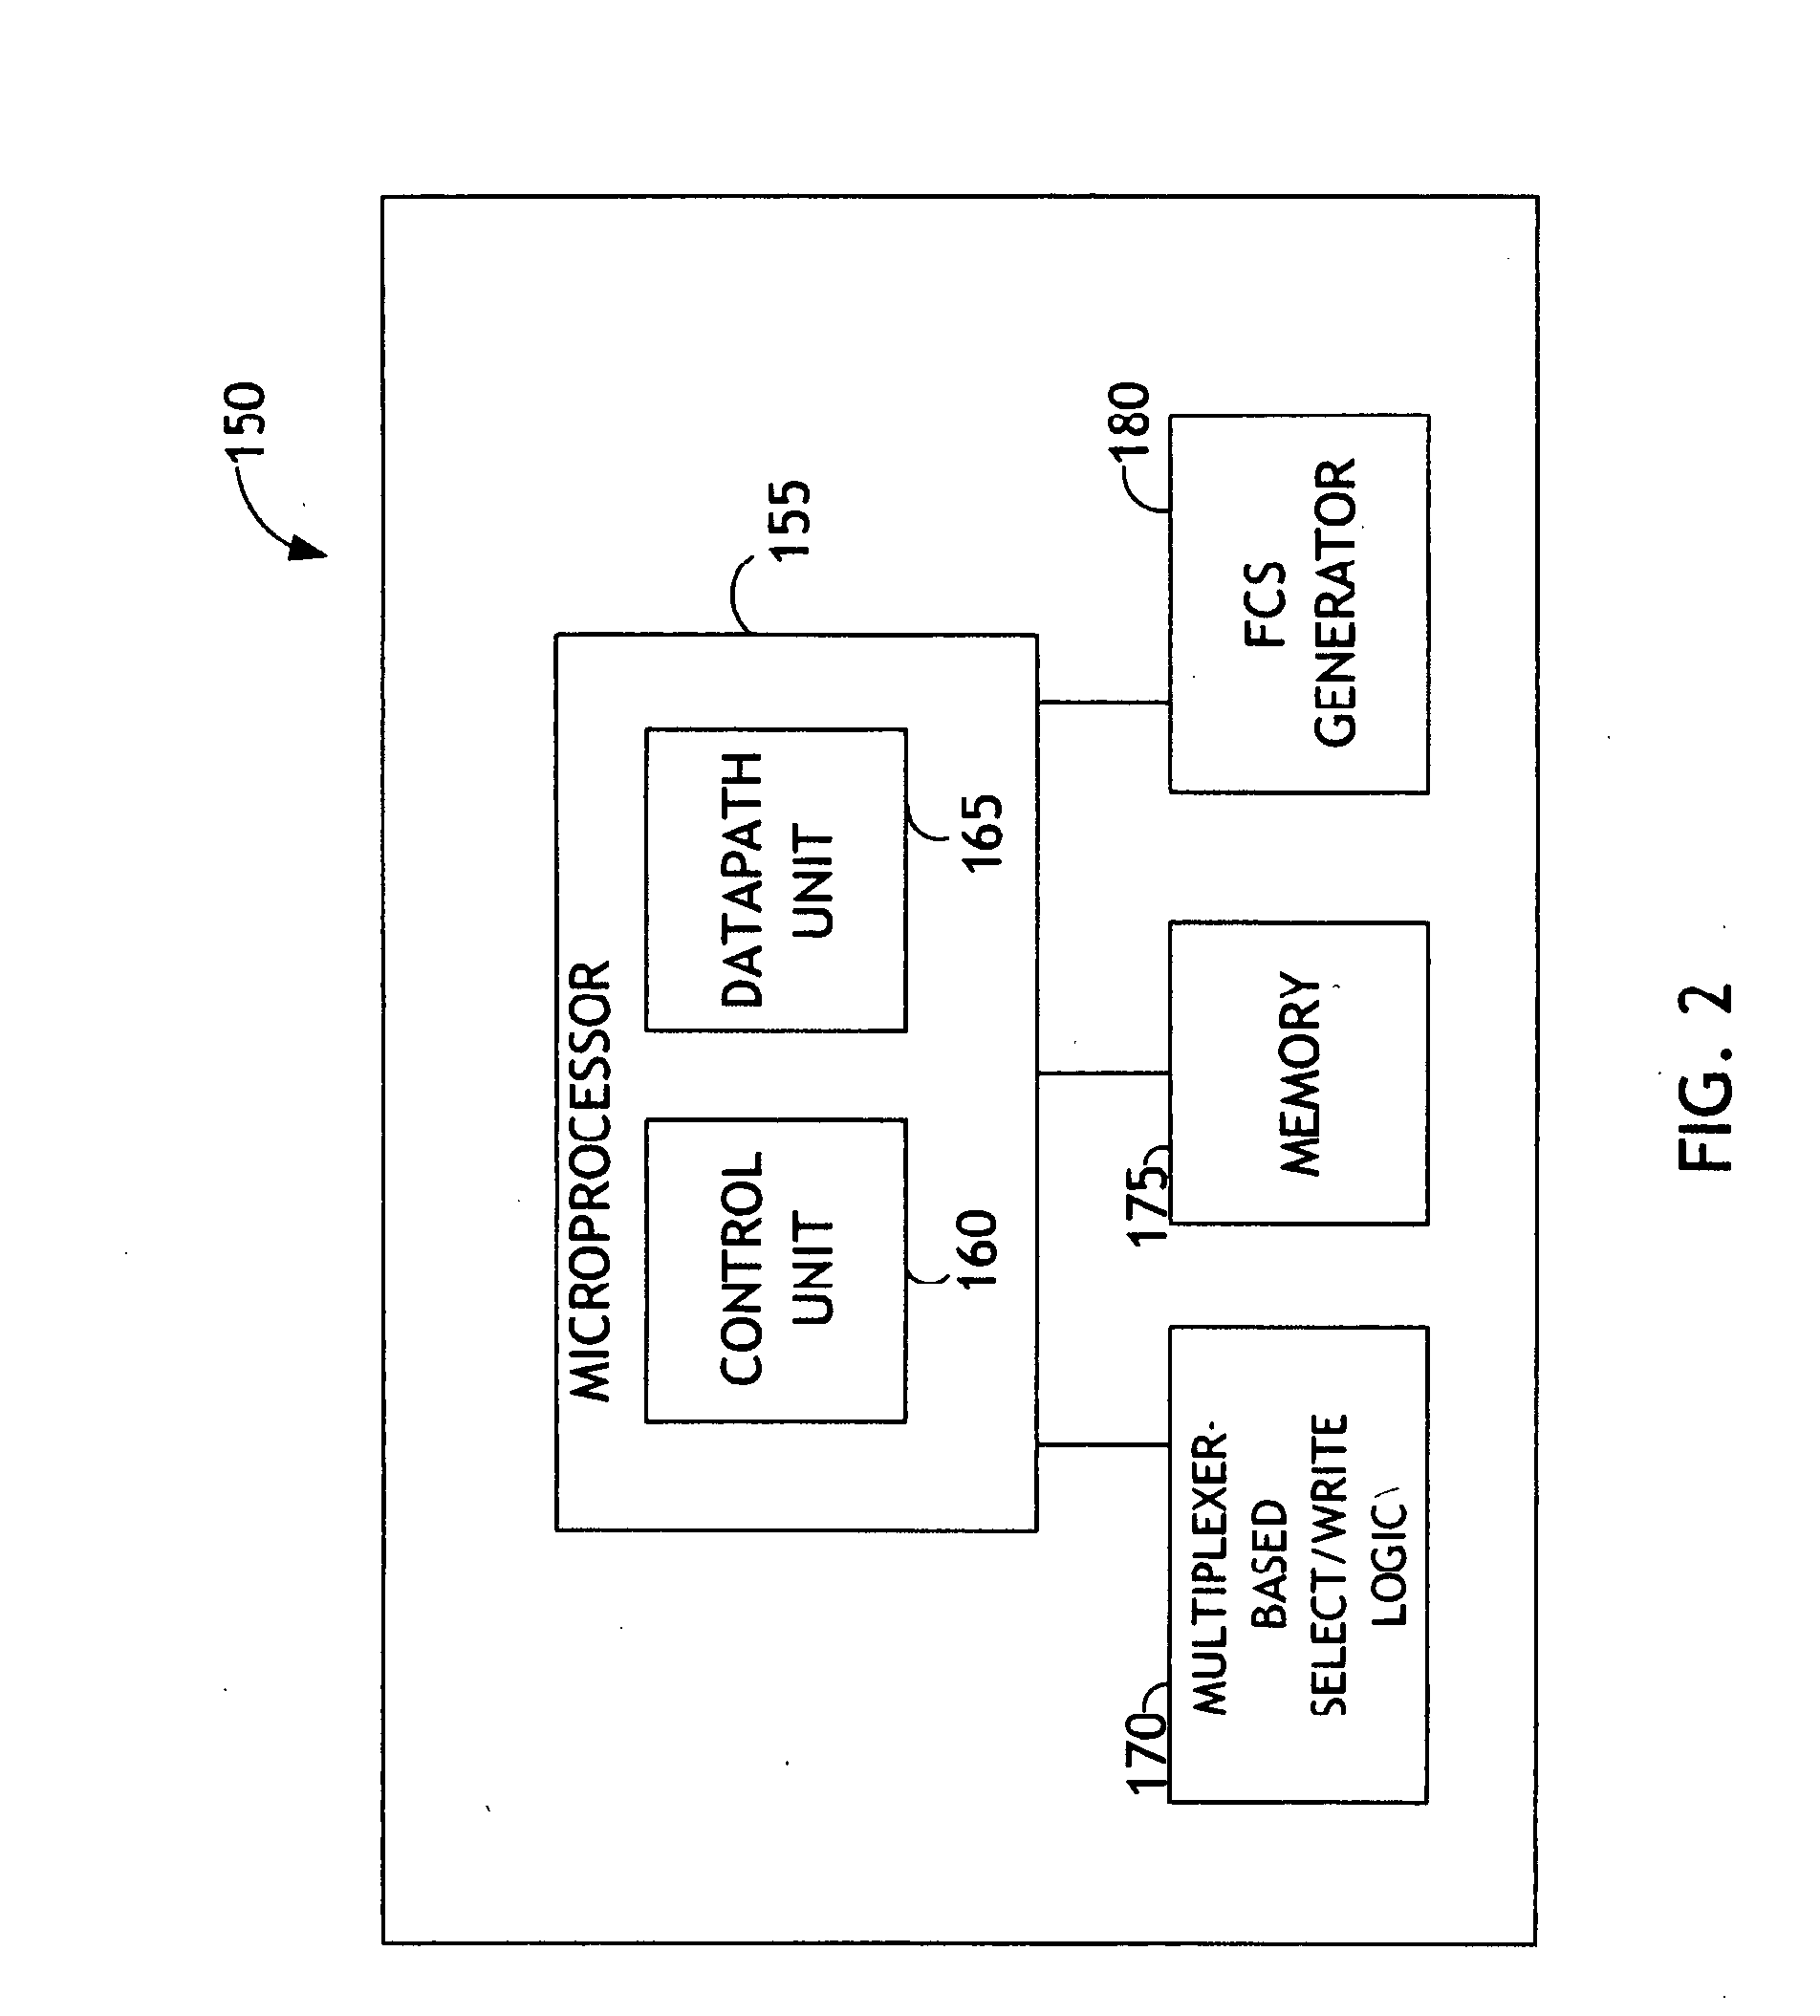 Energy efficient processing device